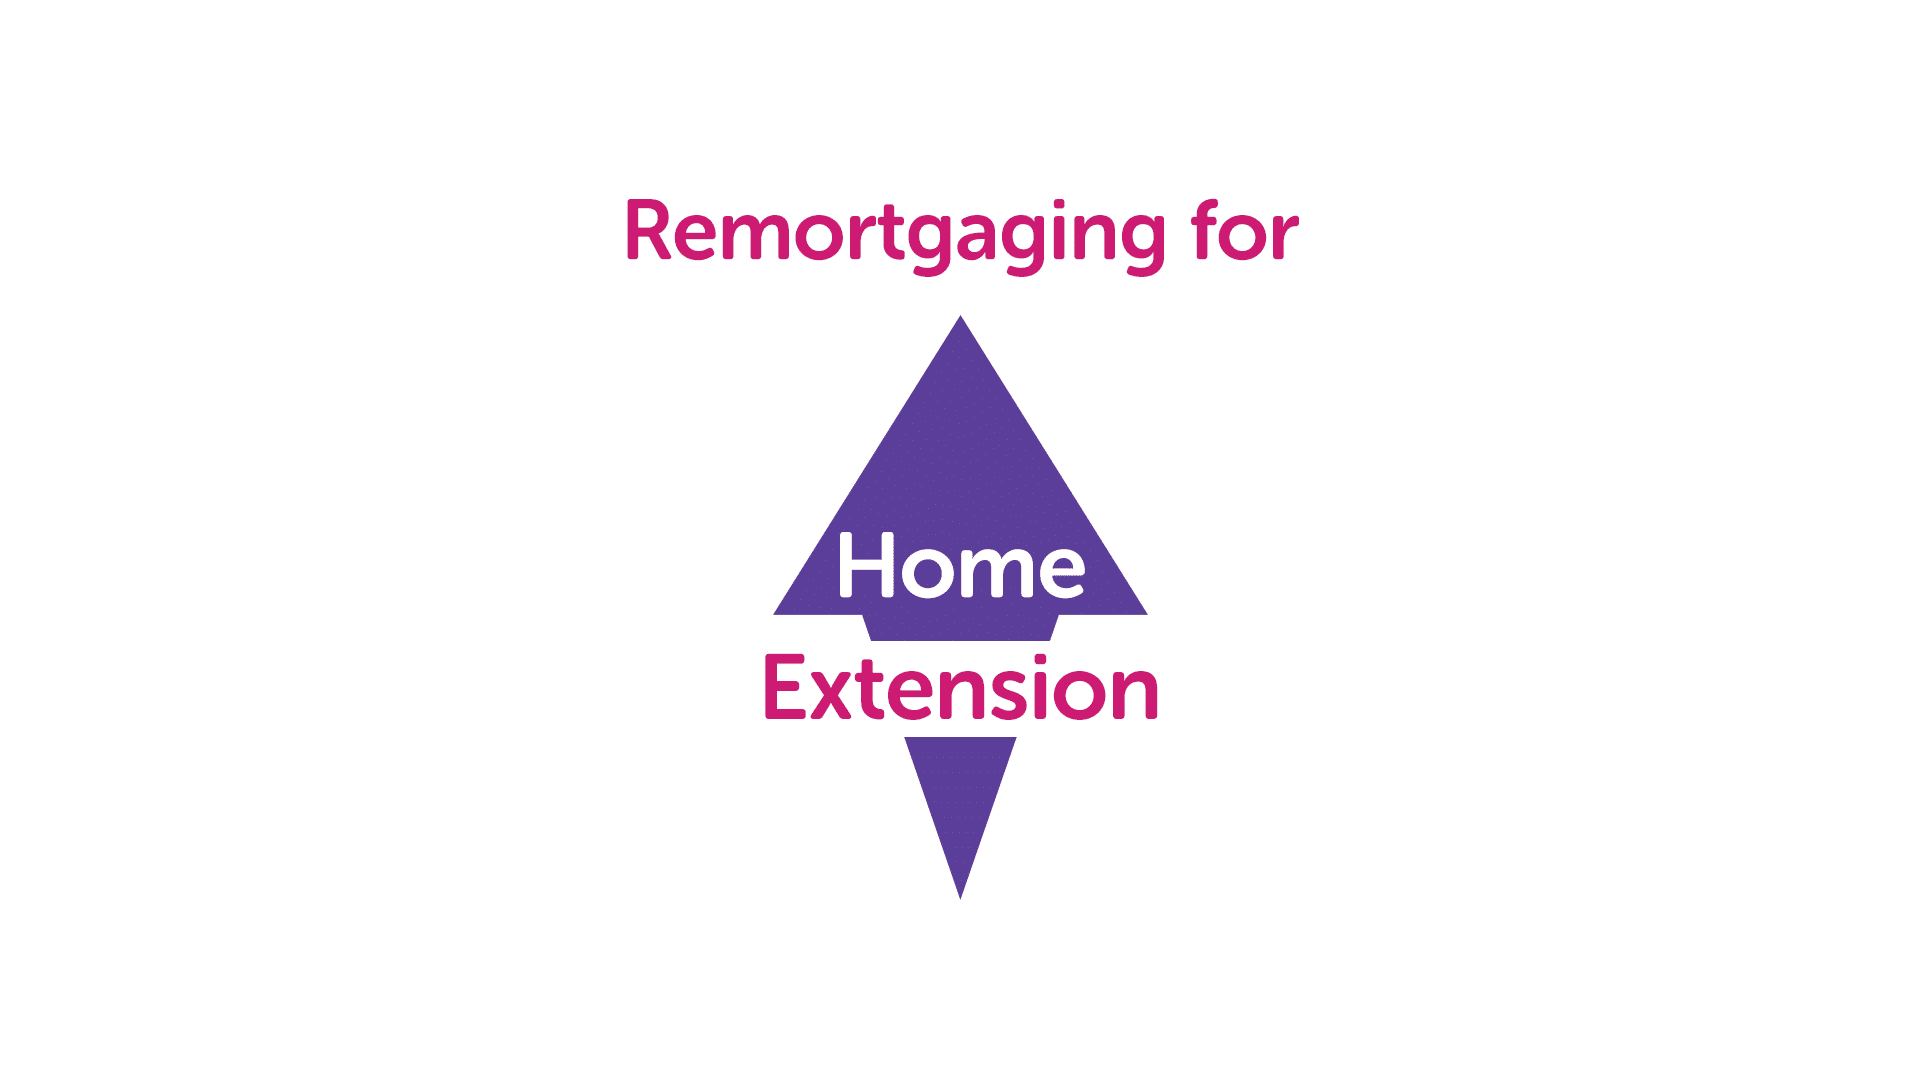 Remortgage for a Home Extension